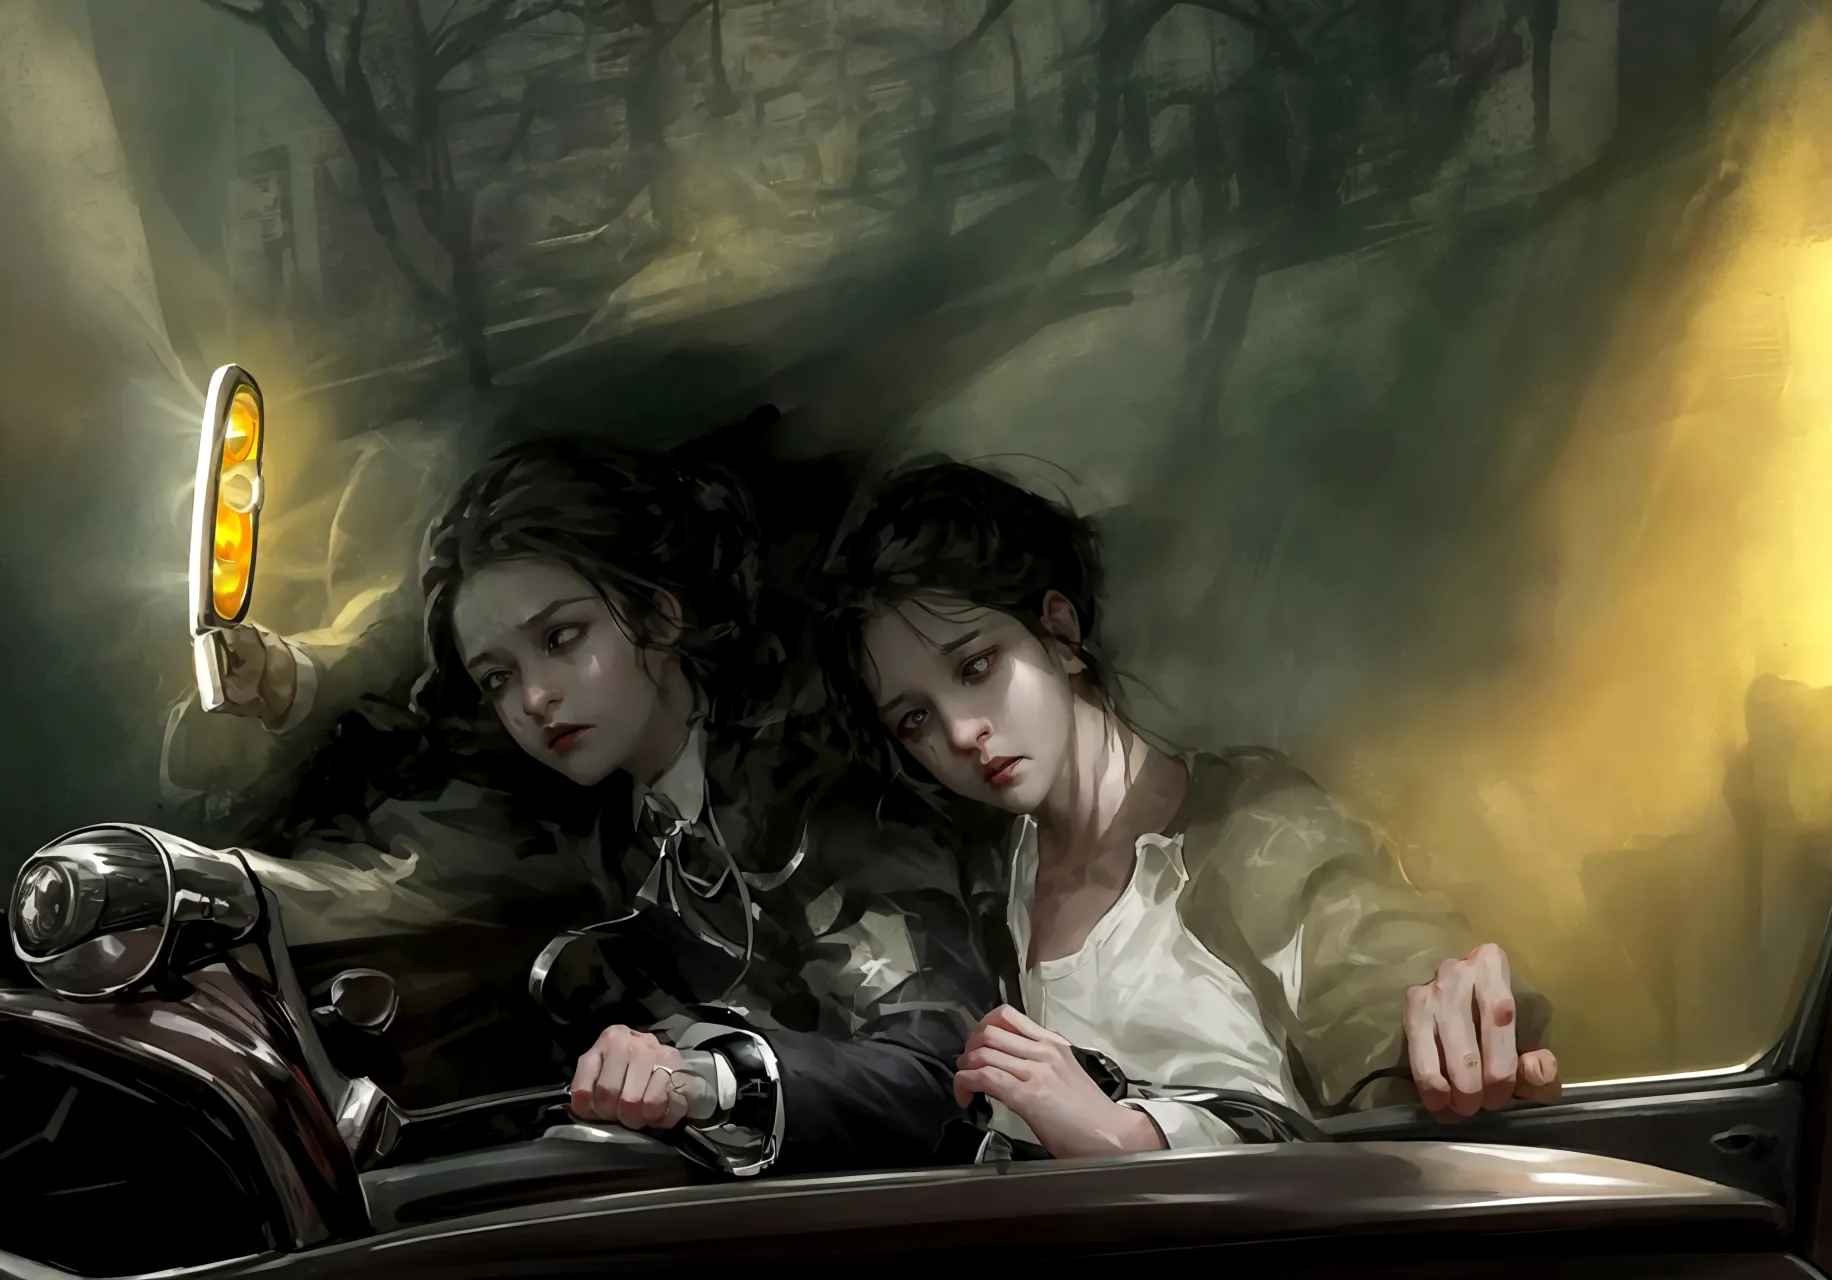 Create an image of a desperate couple inside a car, driving on a dark, deserted road at night. The scene is reminiscent of a hor...